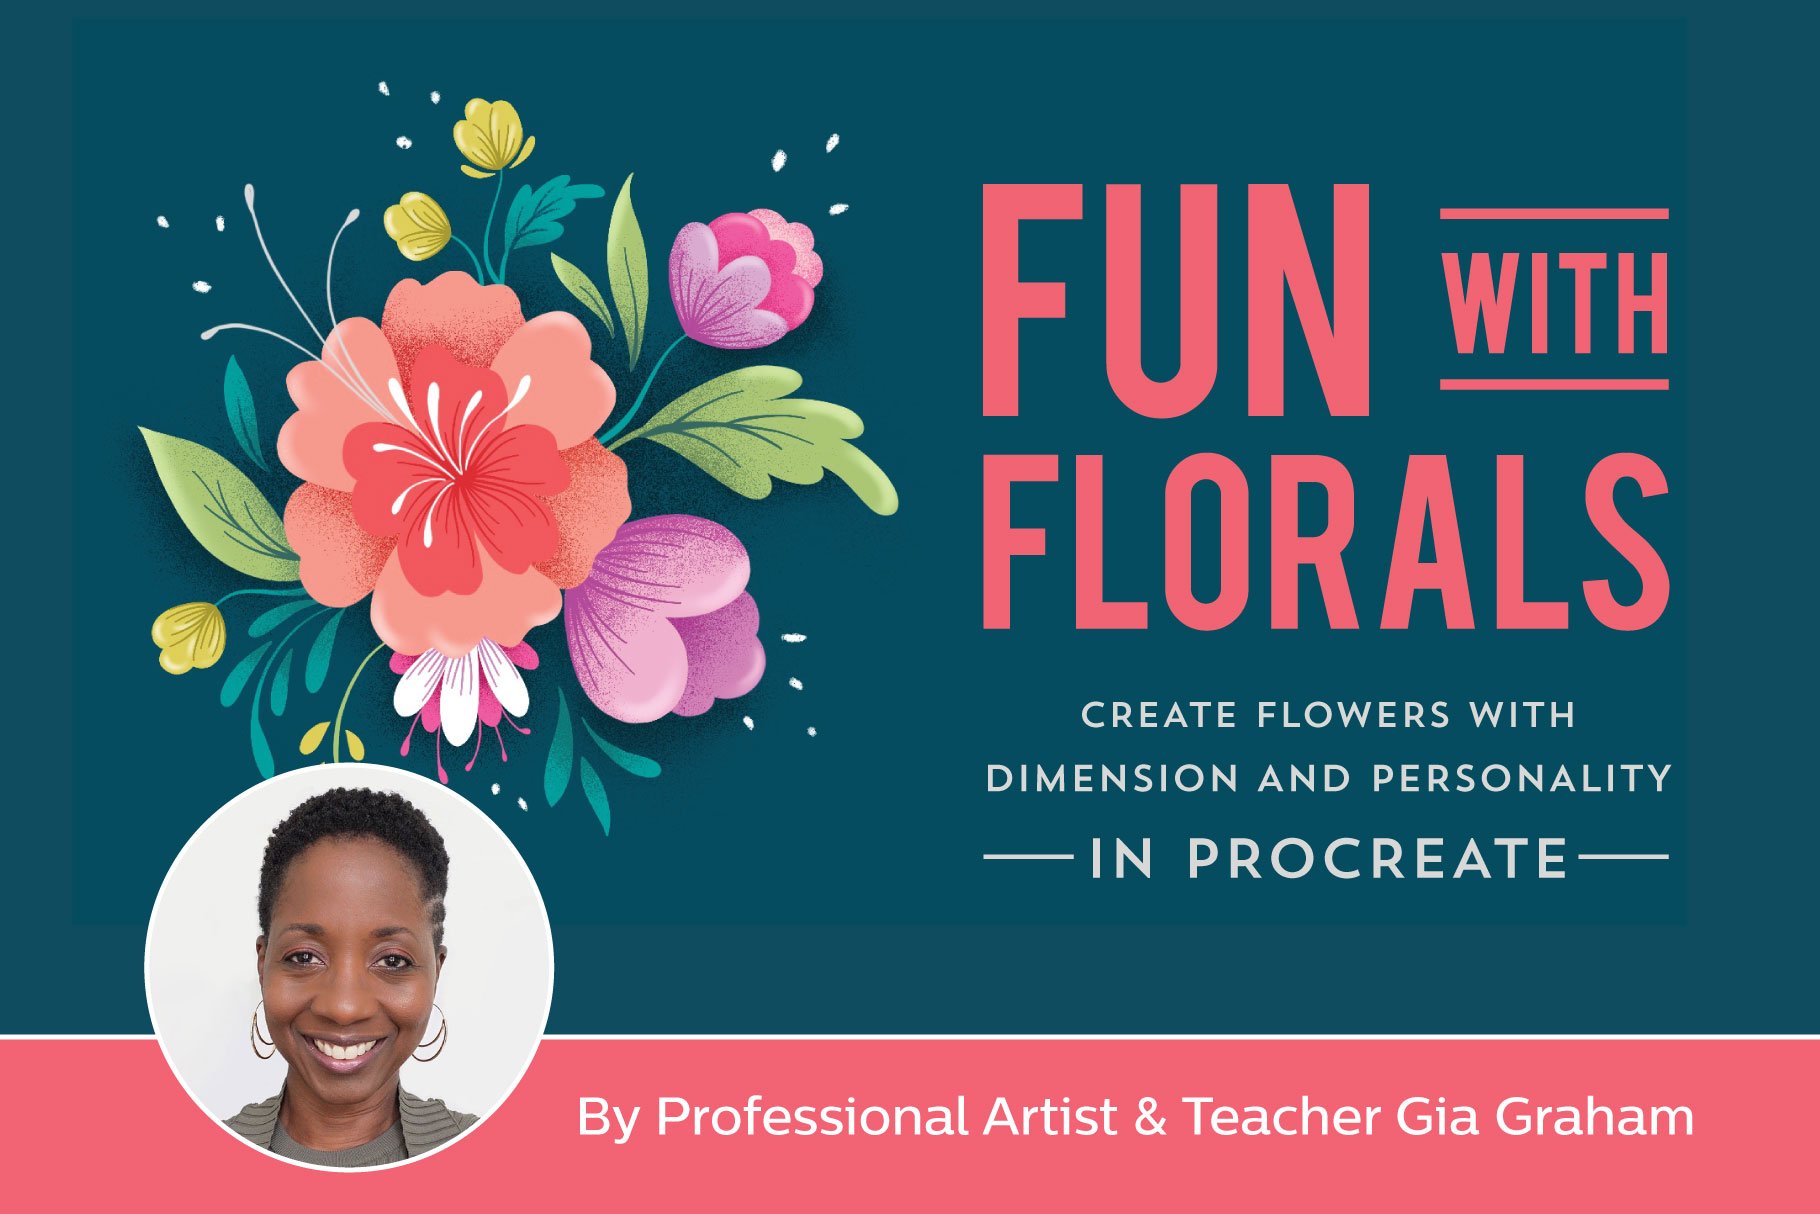 Fun With Florals: Create Flowers with Dimension & Personality in Procreate